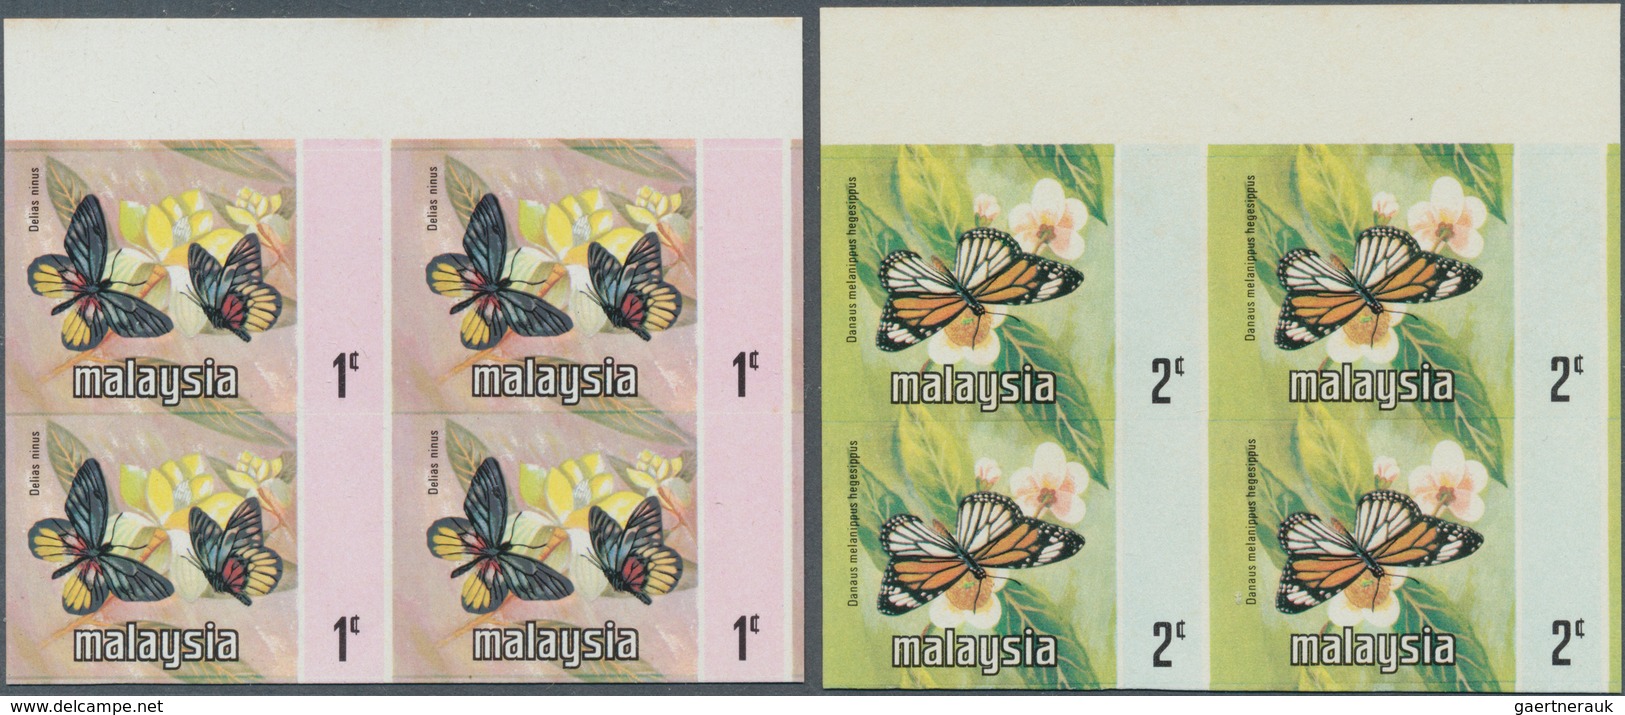 Malaysia: 1971, Butterflies set of seven for the different Malayan States with BLACK OMITTED (countr